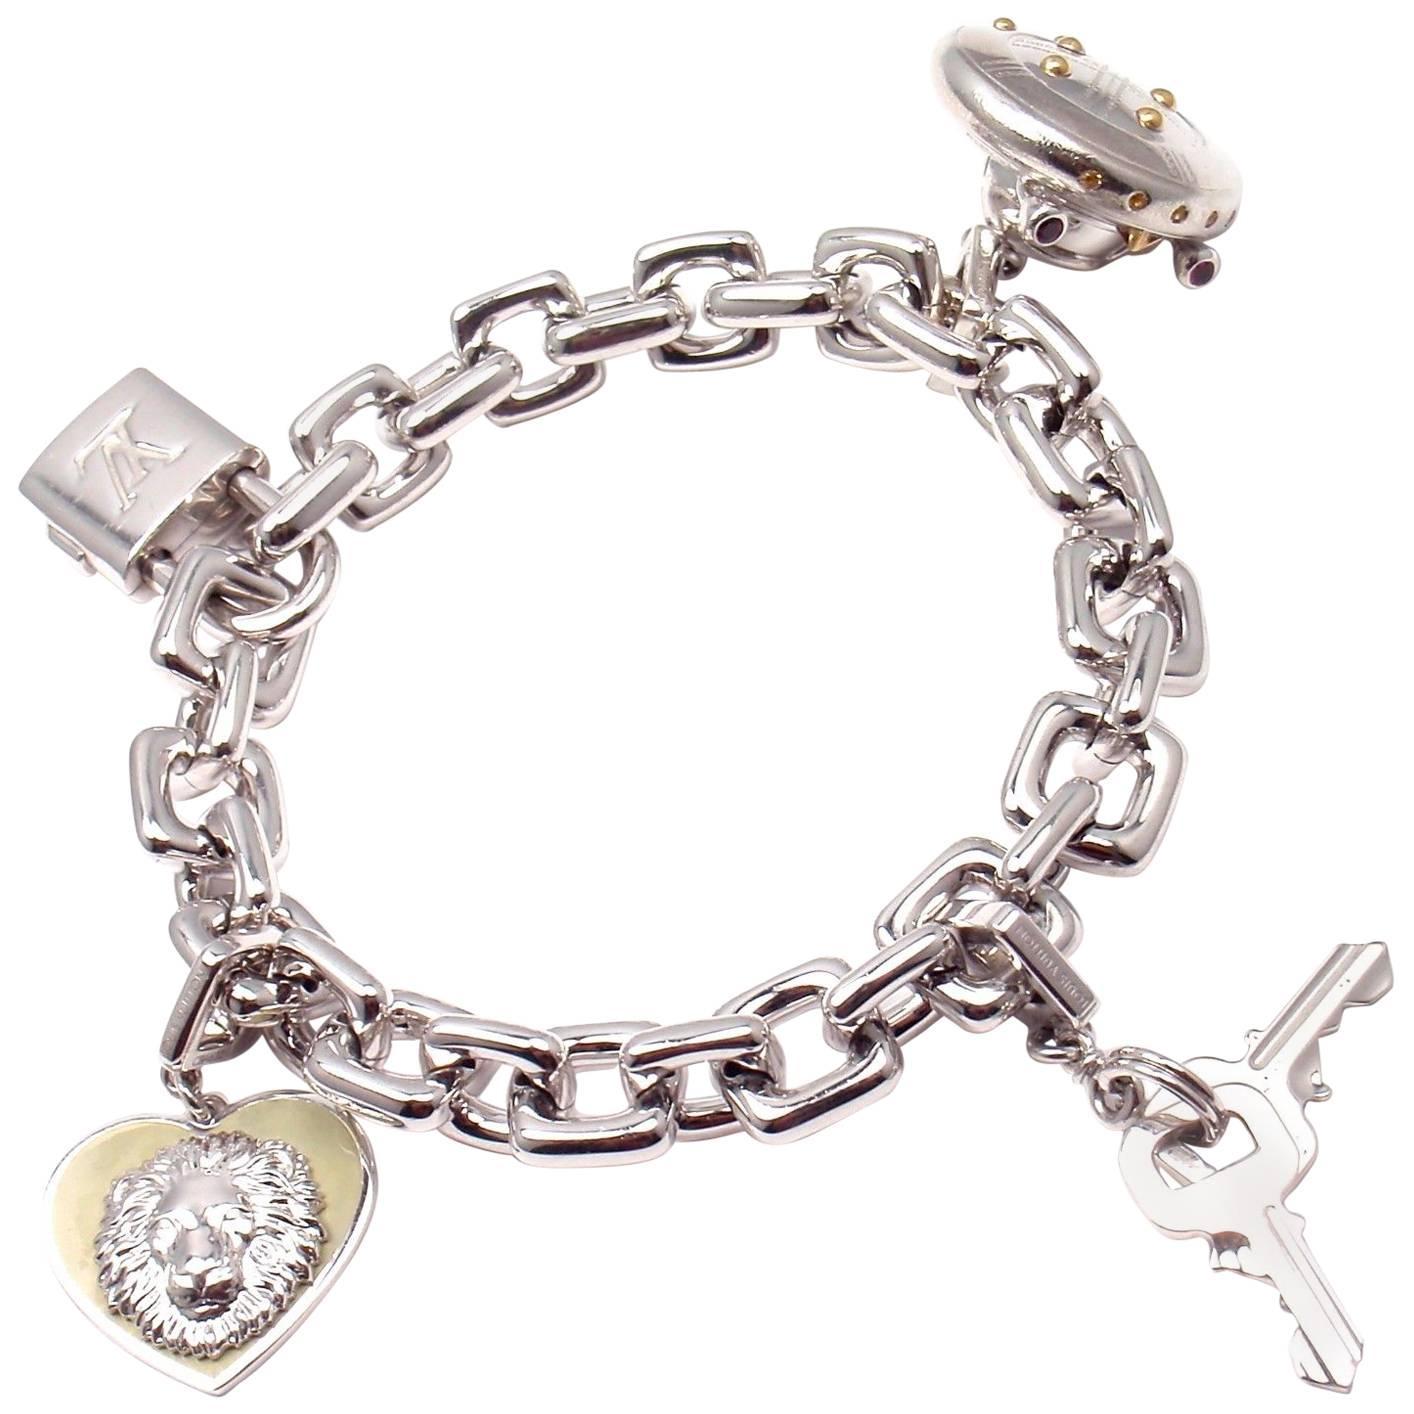 Louis Vuitton Charm Link White Gold Bracelet With Charms For Sale at 1stdibs